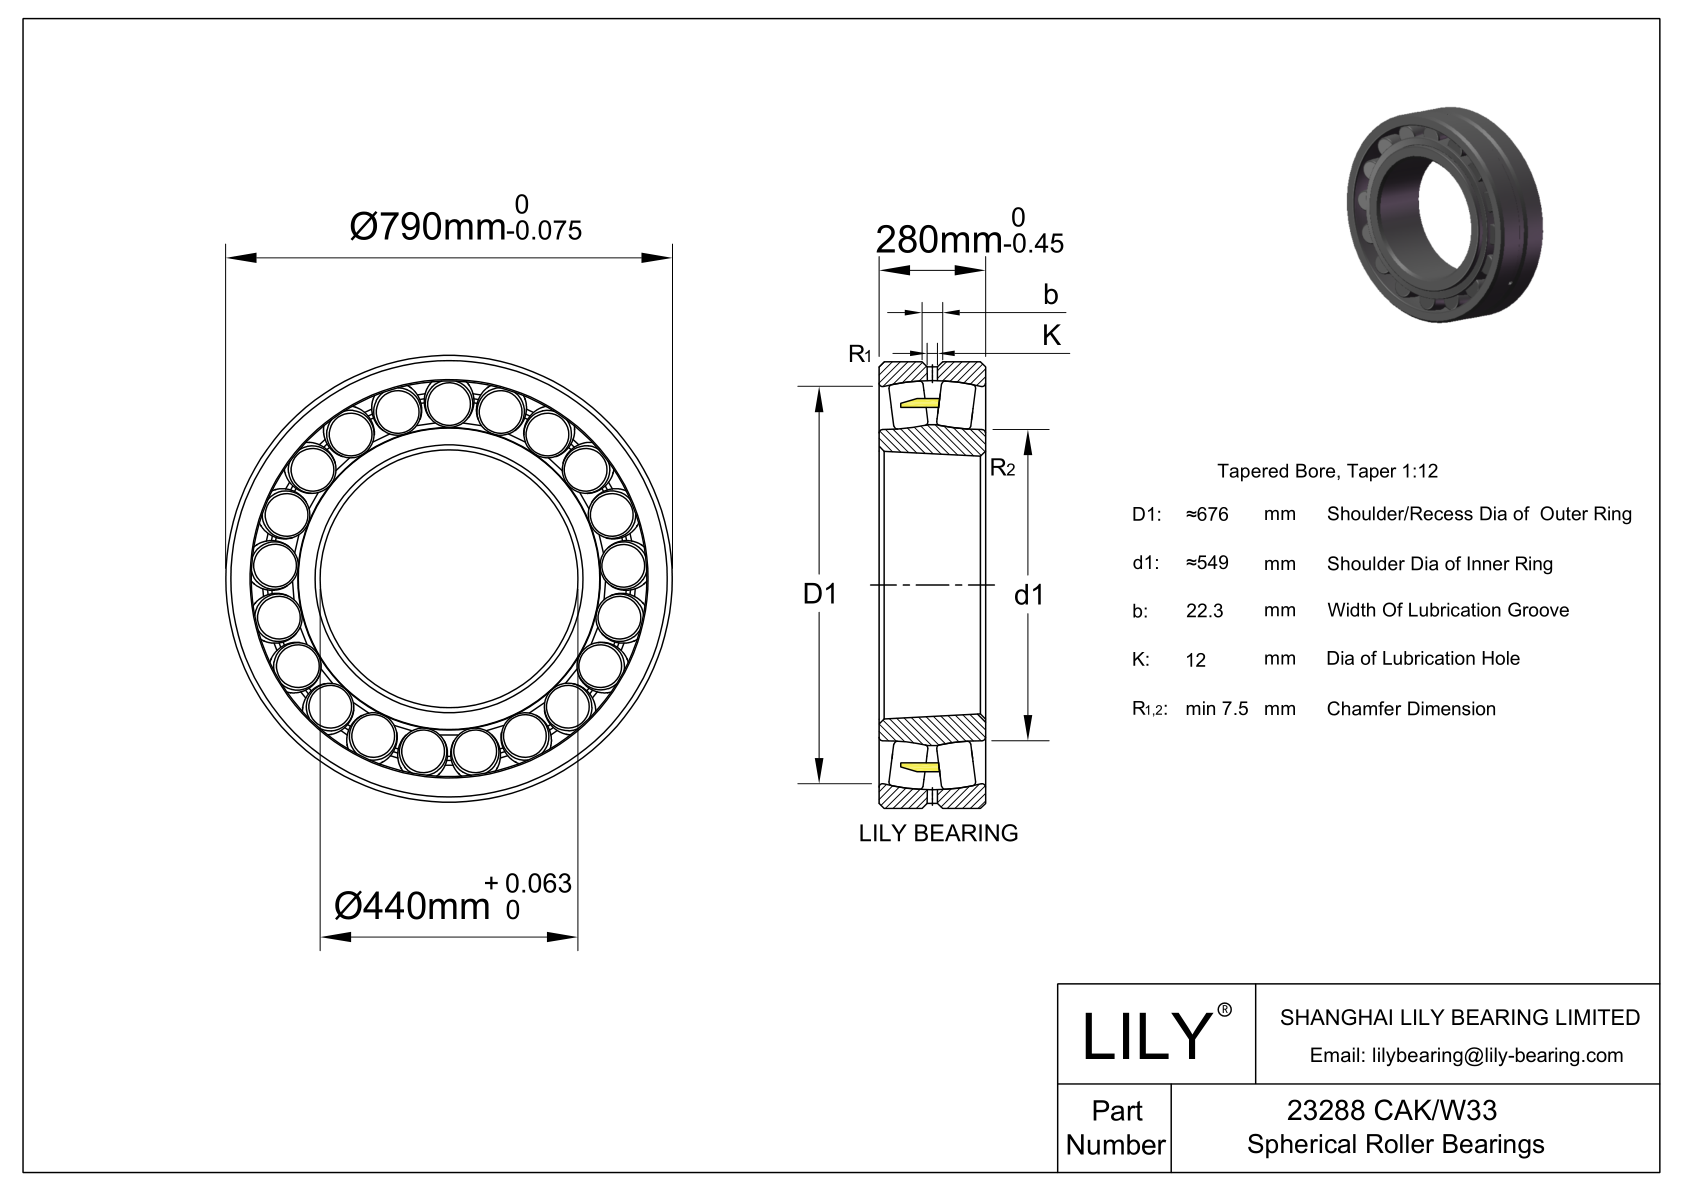 23288 CAK/W33 Double Row Spherical Roller Bearing cad drawing